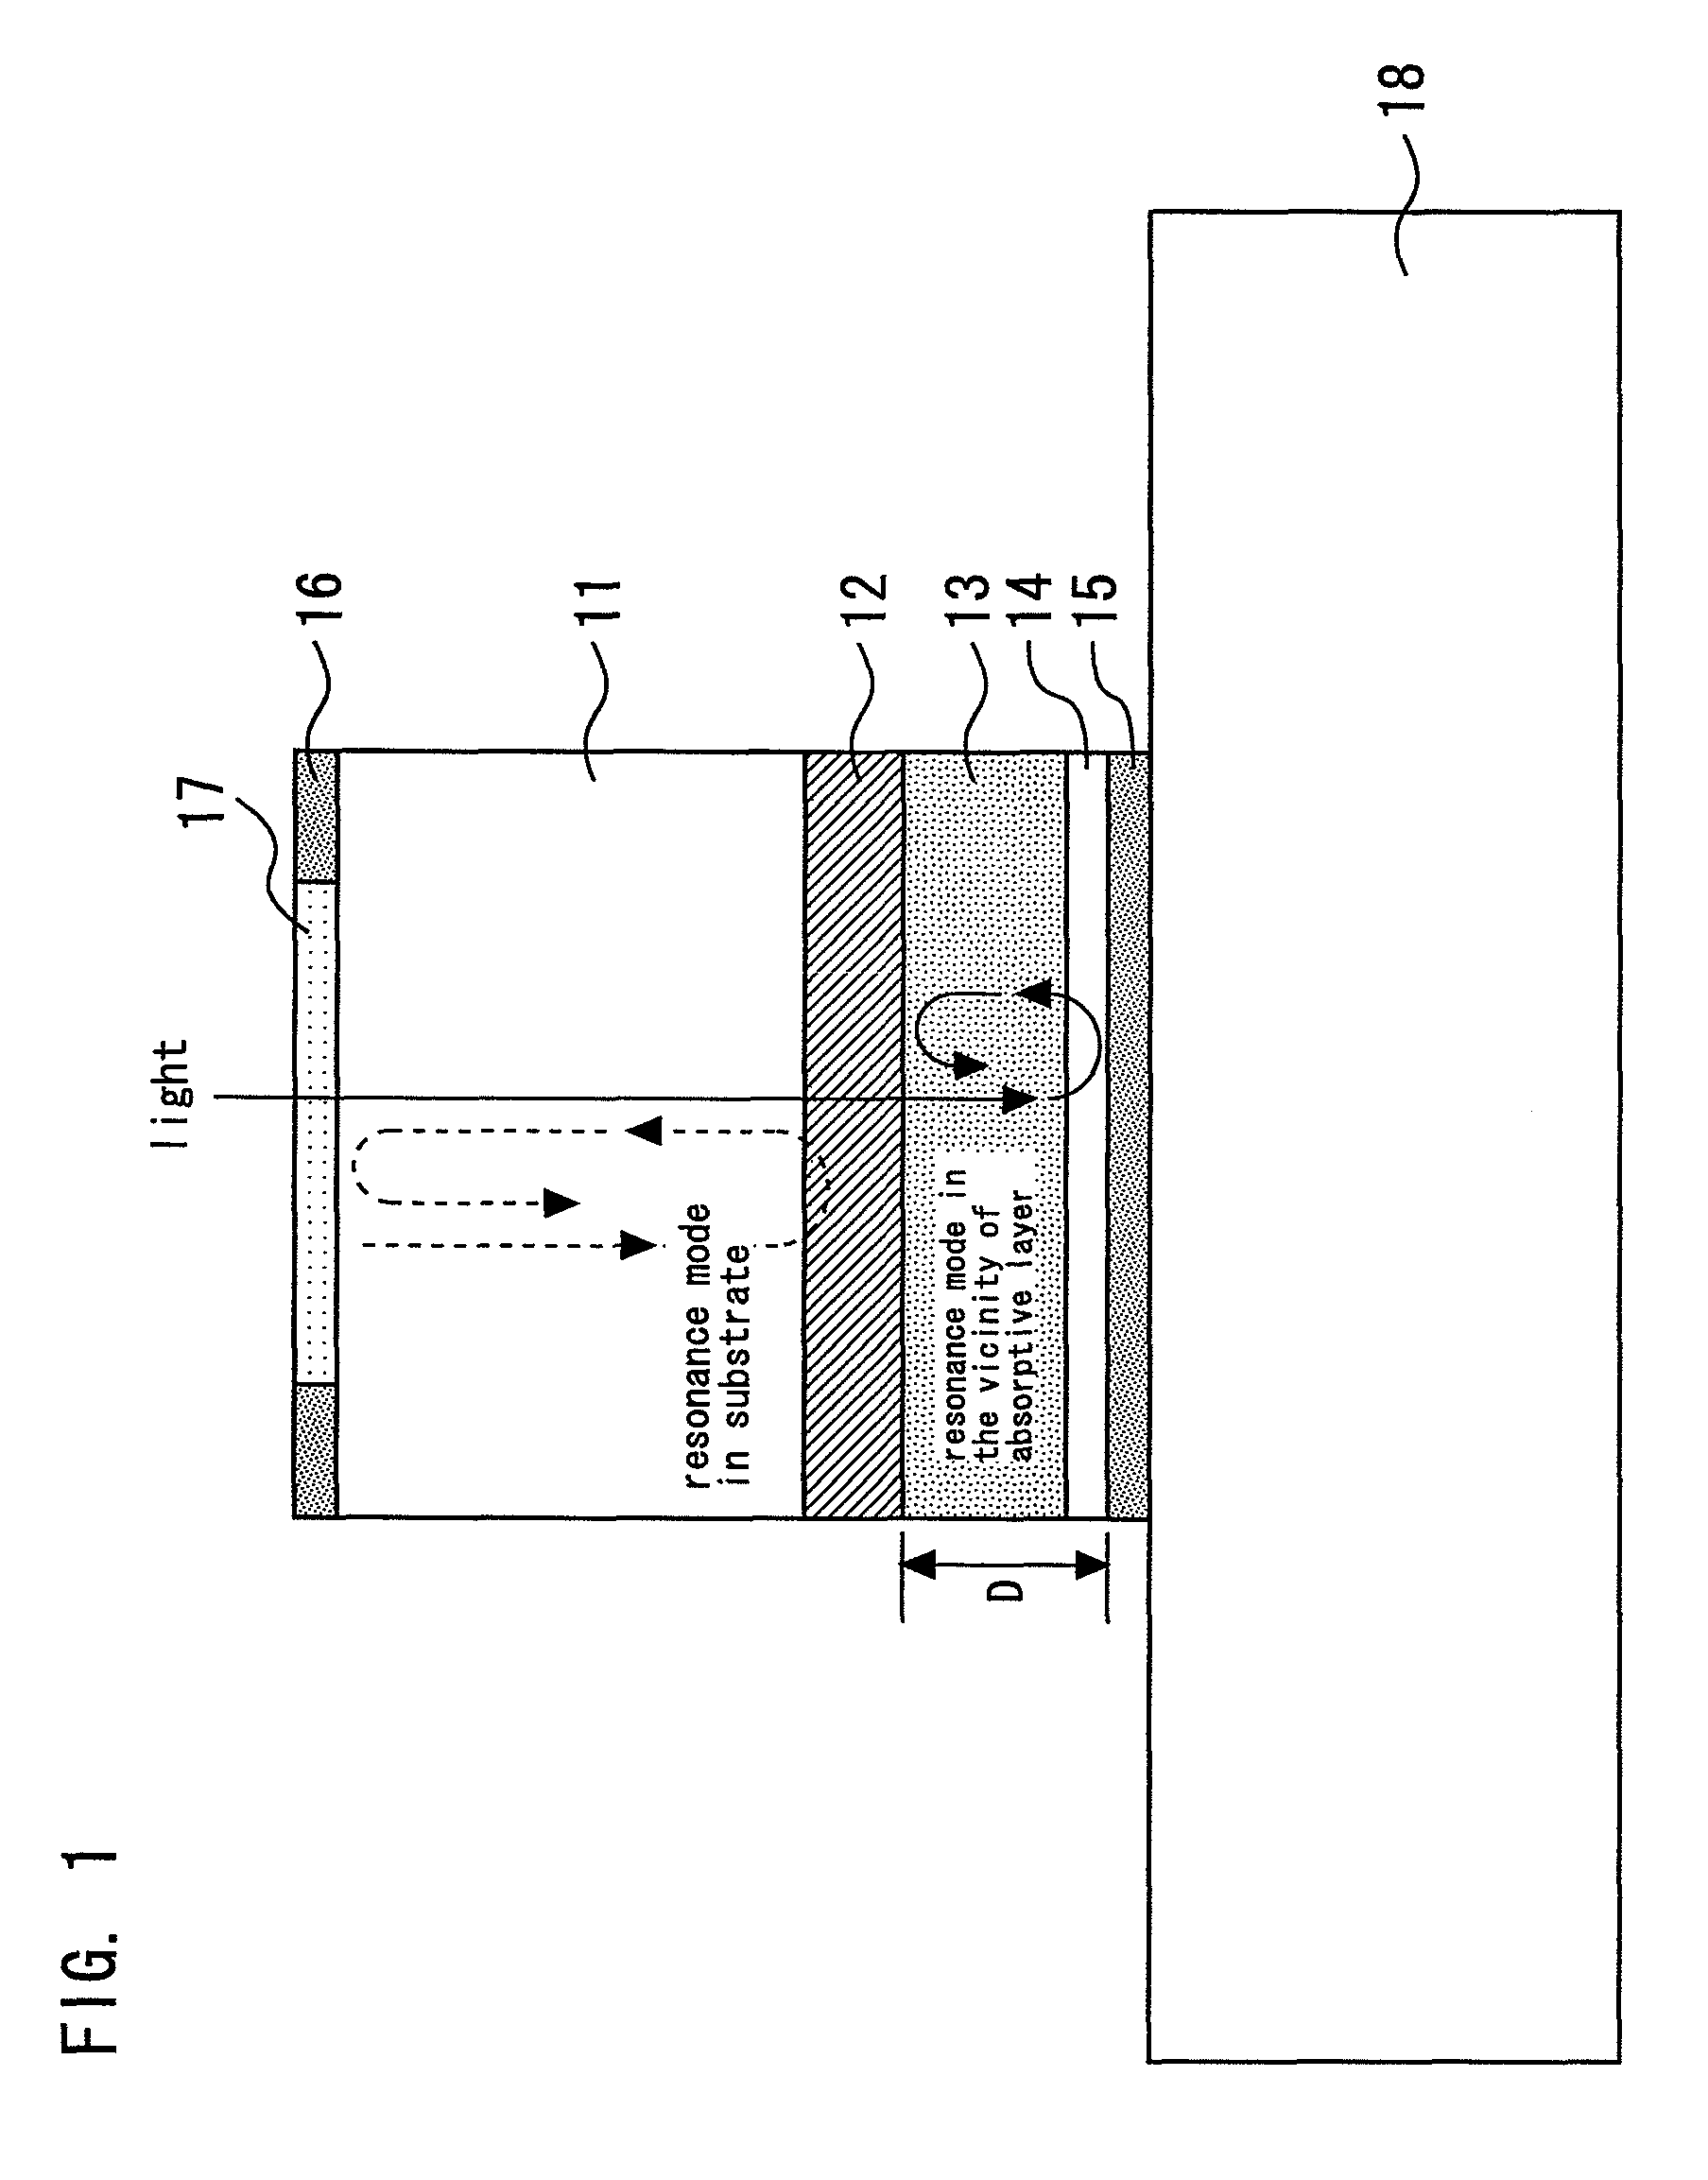 Semiconductor light detecting element including first and second multilayer light reflective structures sandwiching and contacting a light absorptive layer